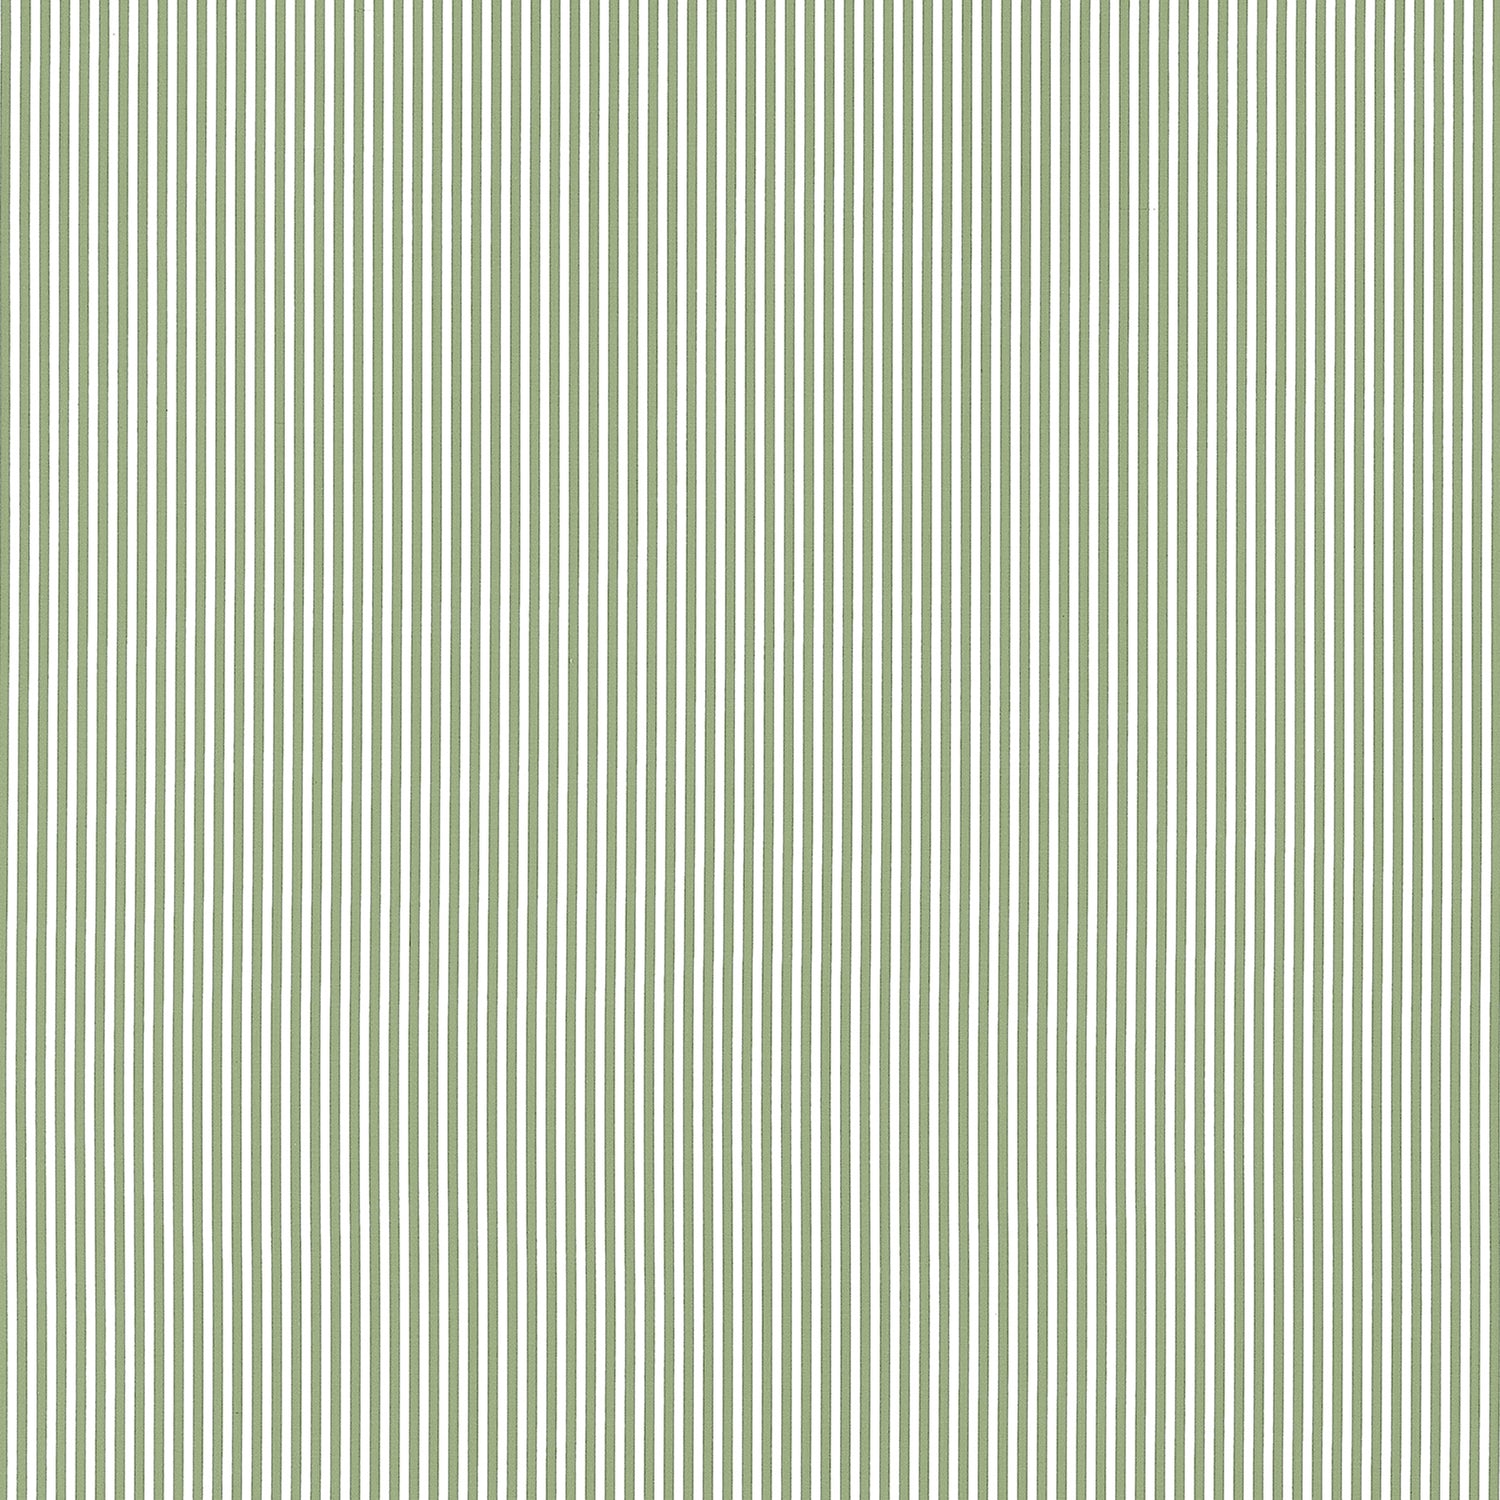 Holden Stripe fabric in green color - pattern number AW57805 - by Anna French in the Bristol collection